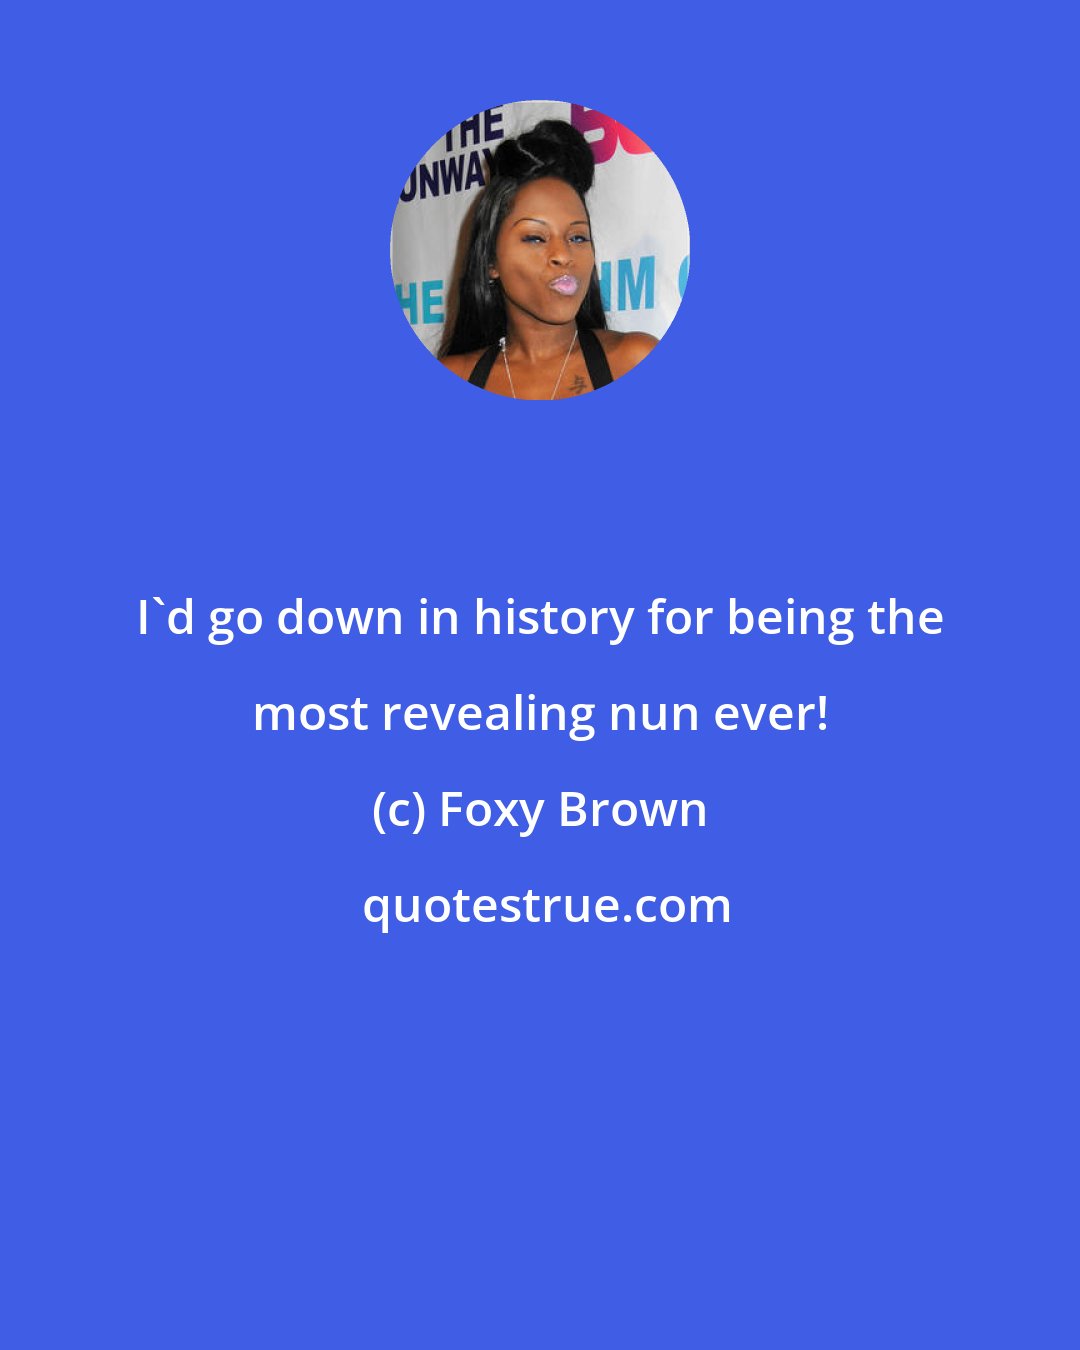 Foxy Brown: I'd go down in history for being the most revealing nun ever!